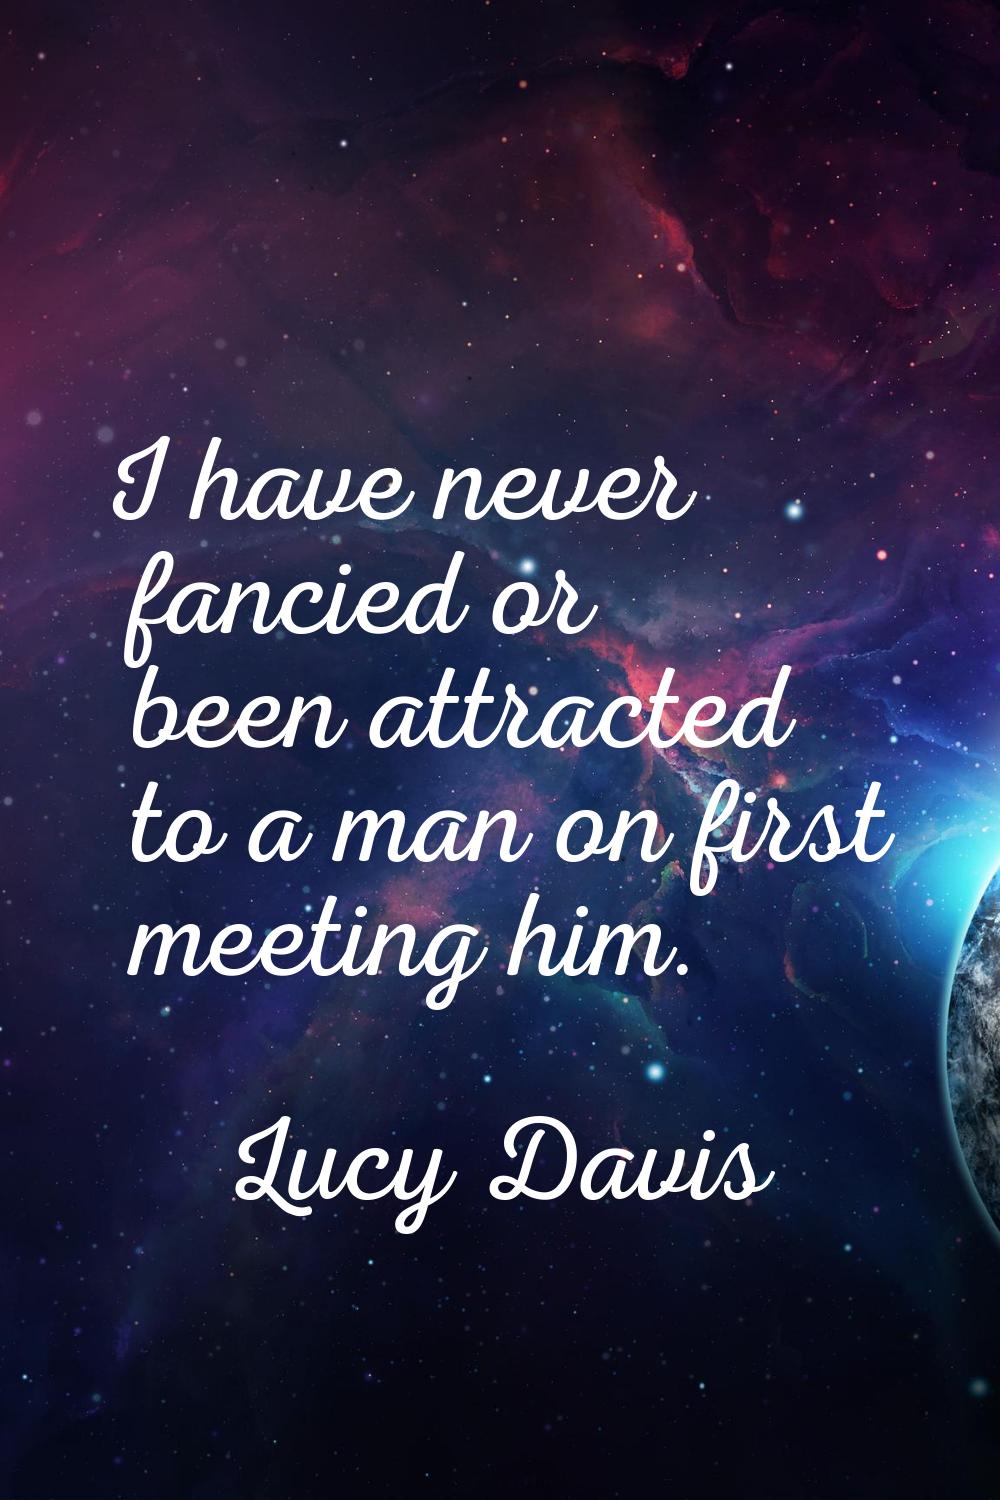 I have never fancied or been attracted to a man on first meeting him.